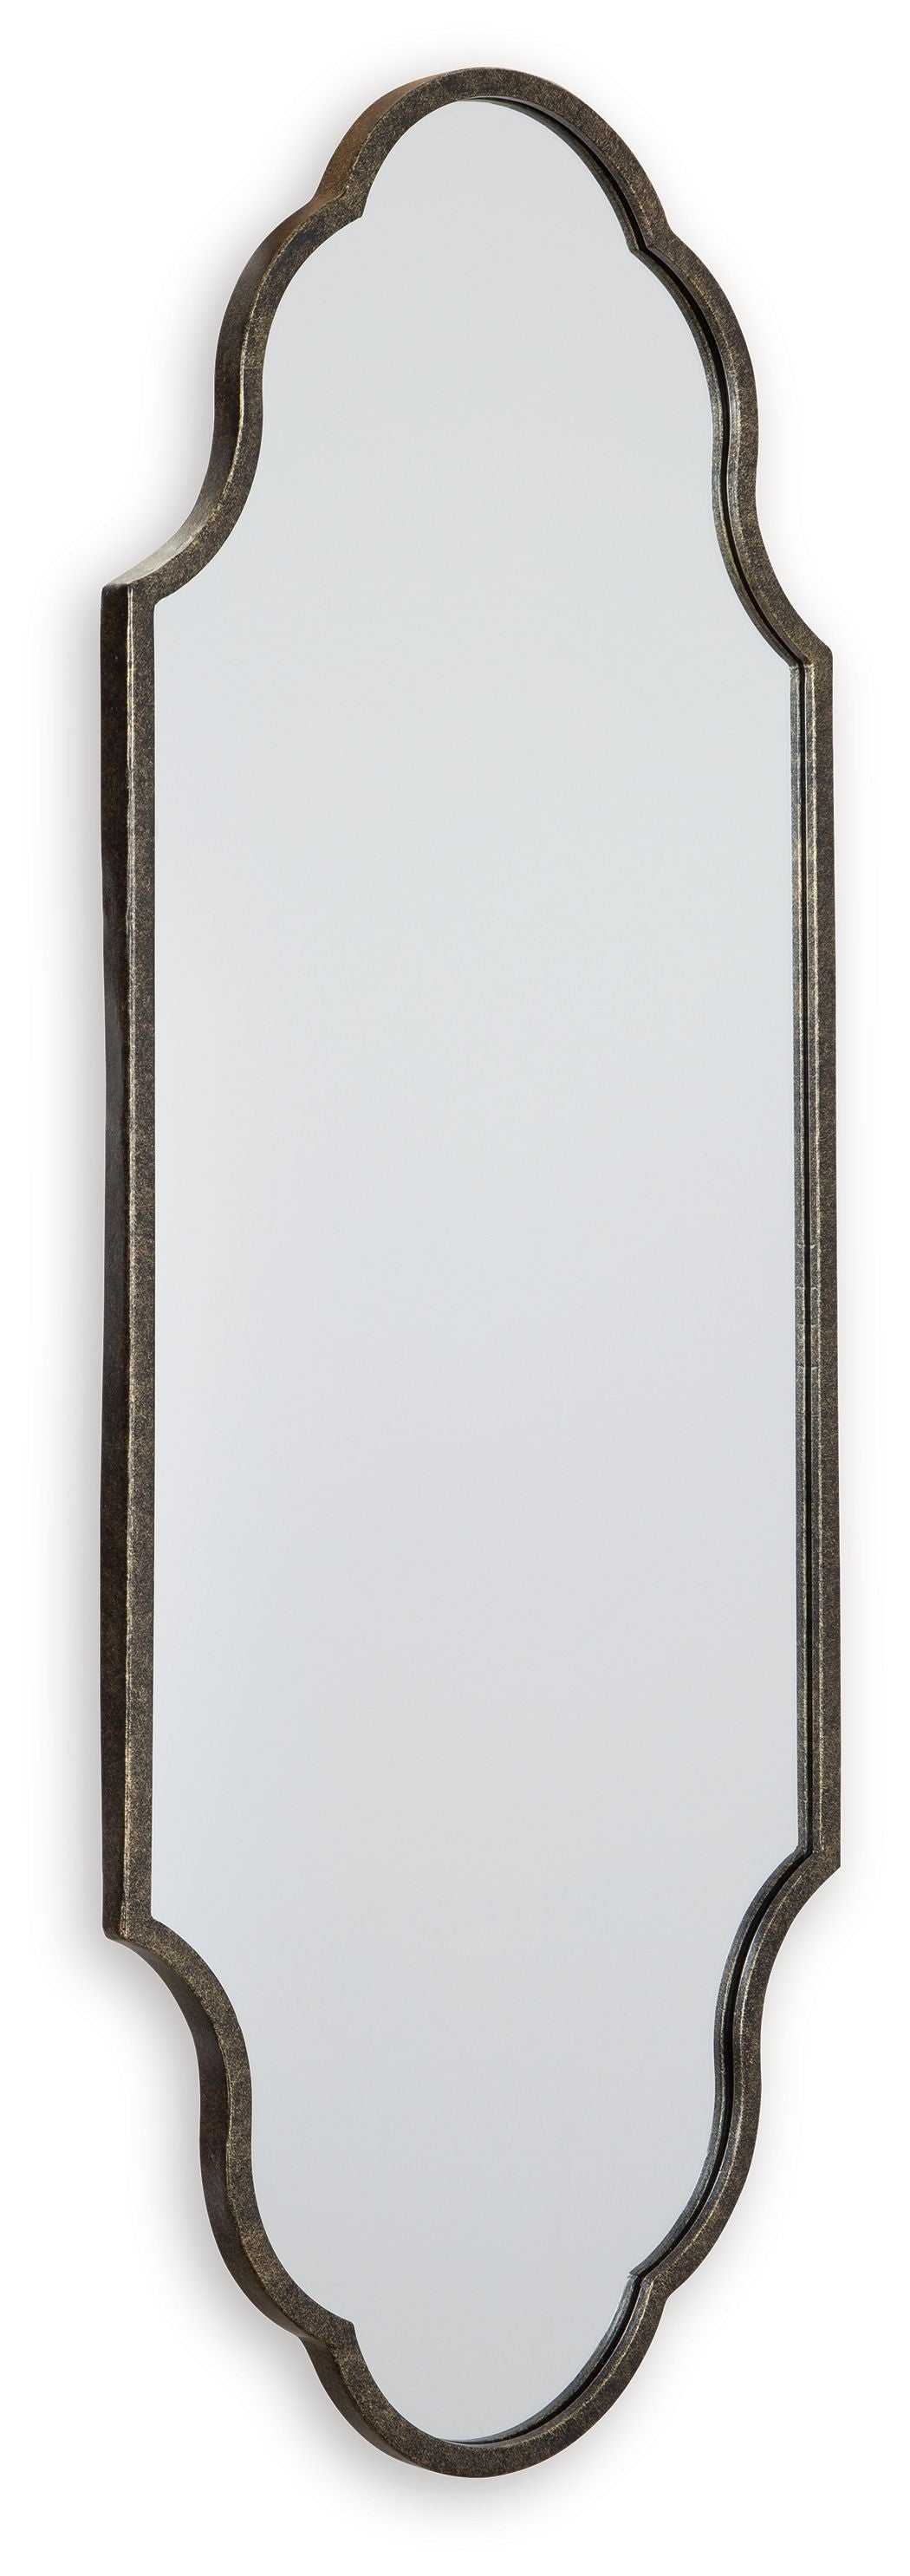 Hallgate - Antique Gold Finish - Accent Mirror Tony's Home Furnishings Furniture. Beds. Dressers. Sofas.